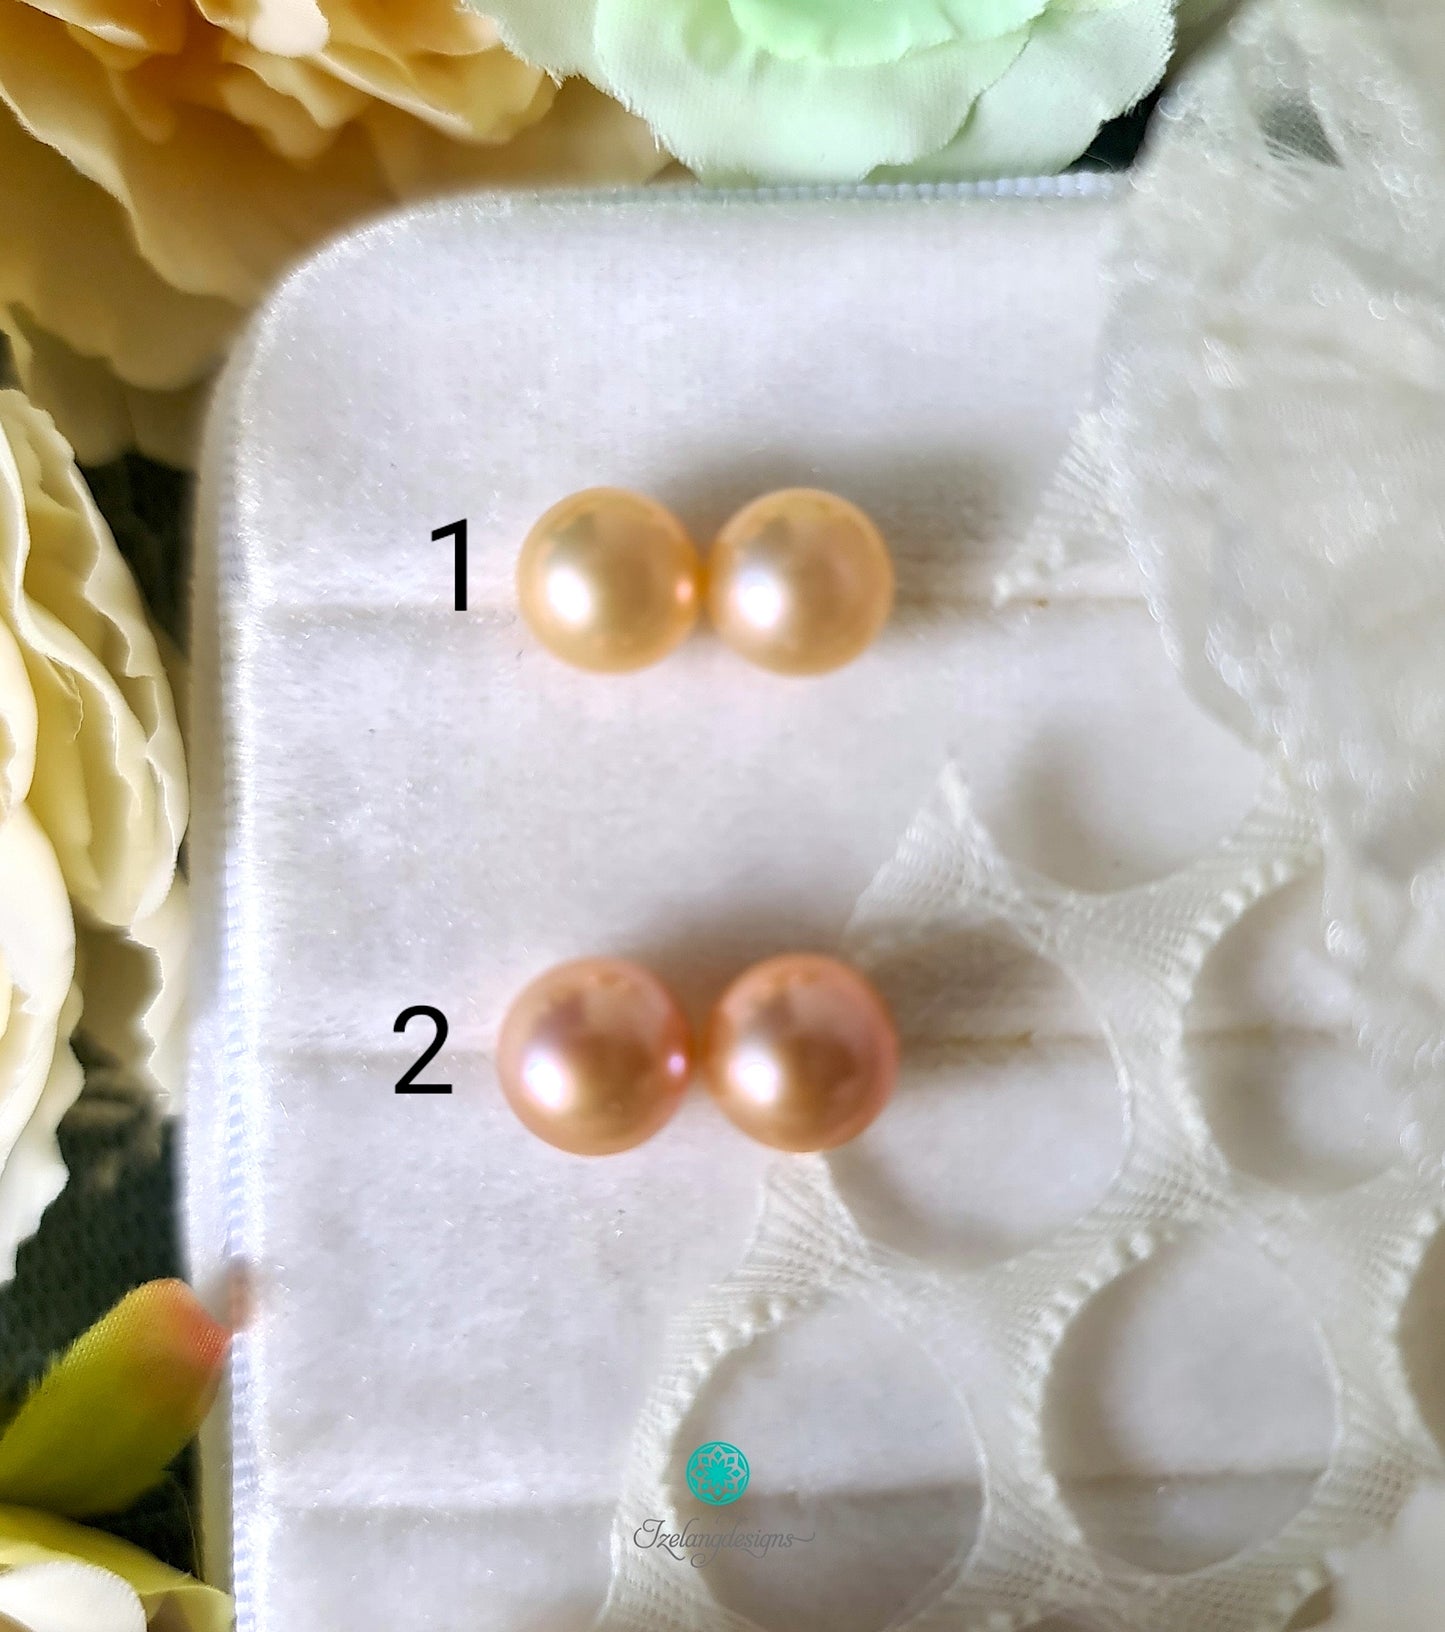 Pink Freshwater Pearl Stud Earring with 14K Gold Filled-EGM113